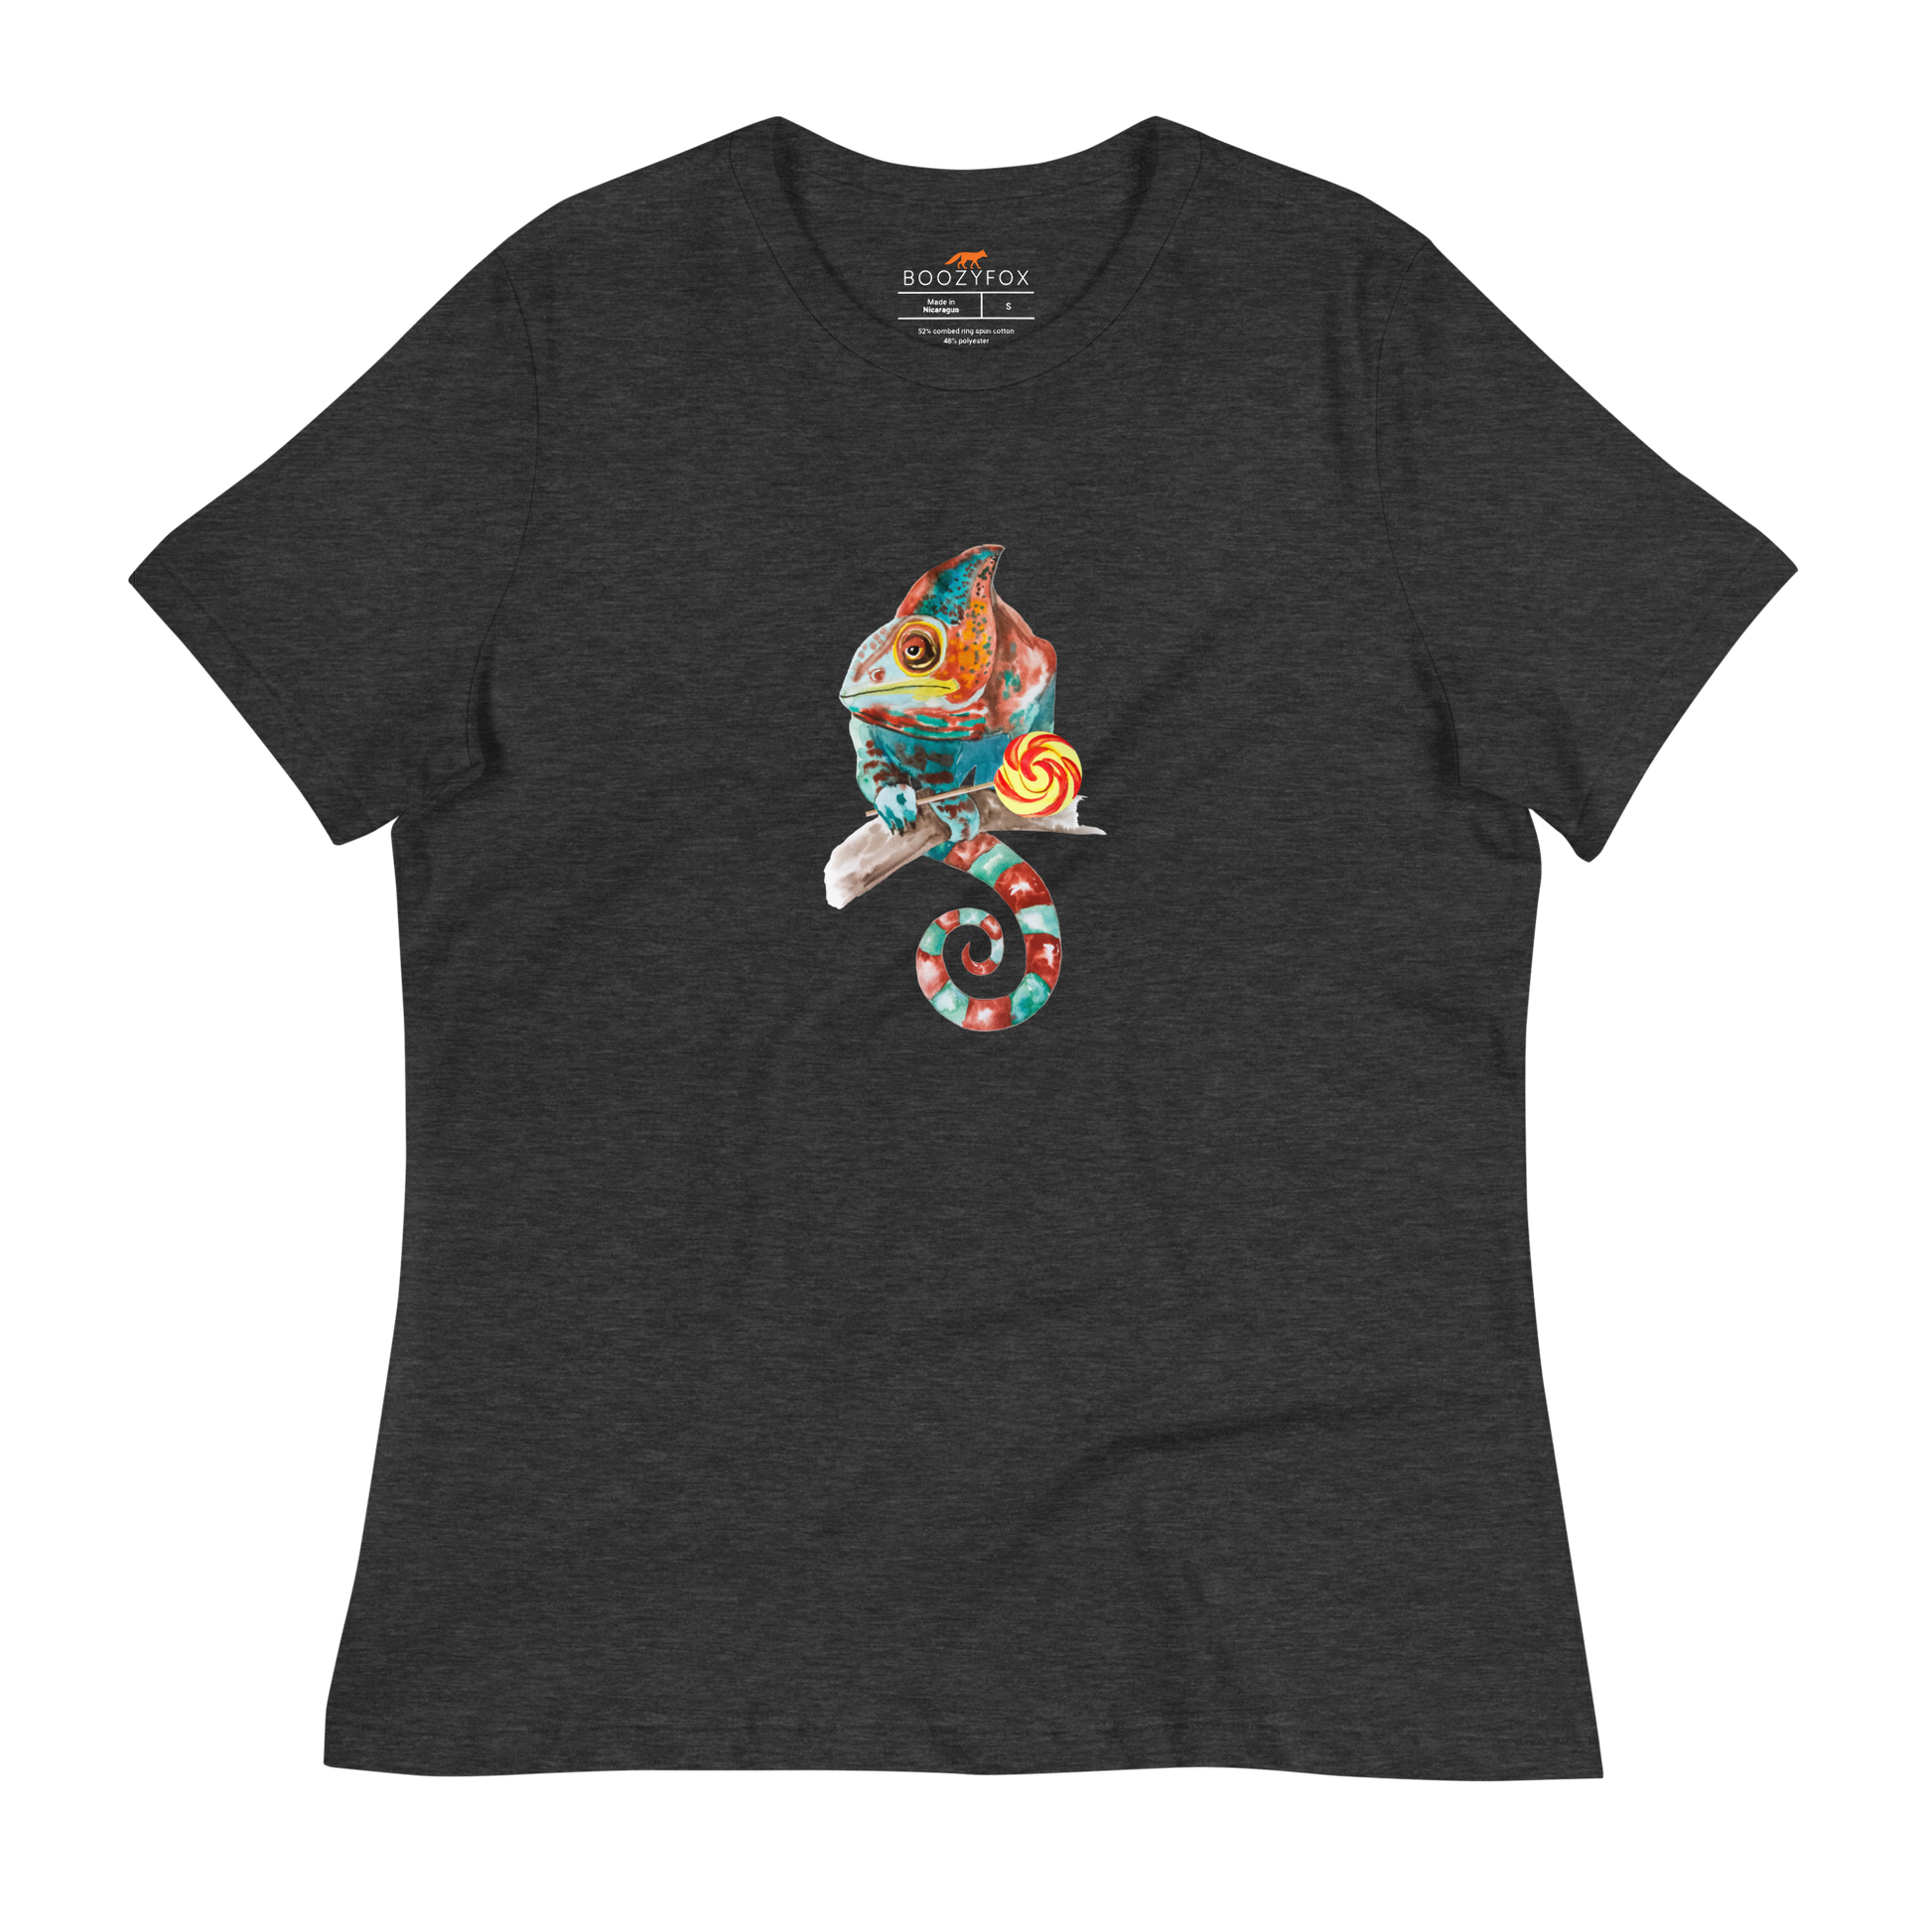 Women's relaxed dark grey heather Chameleon t-shirt featuring a colorful Chameleon With A Lollipop graphic on the chest - Women's Graphic Chameleon Tees - Boozy Fox